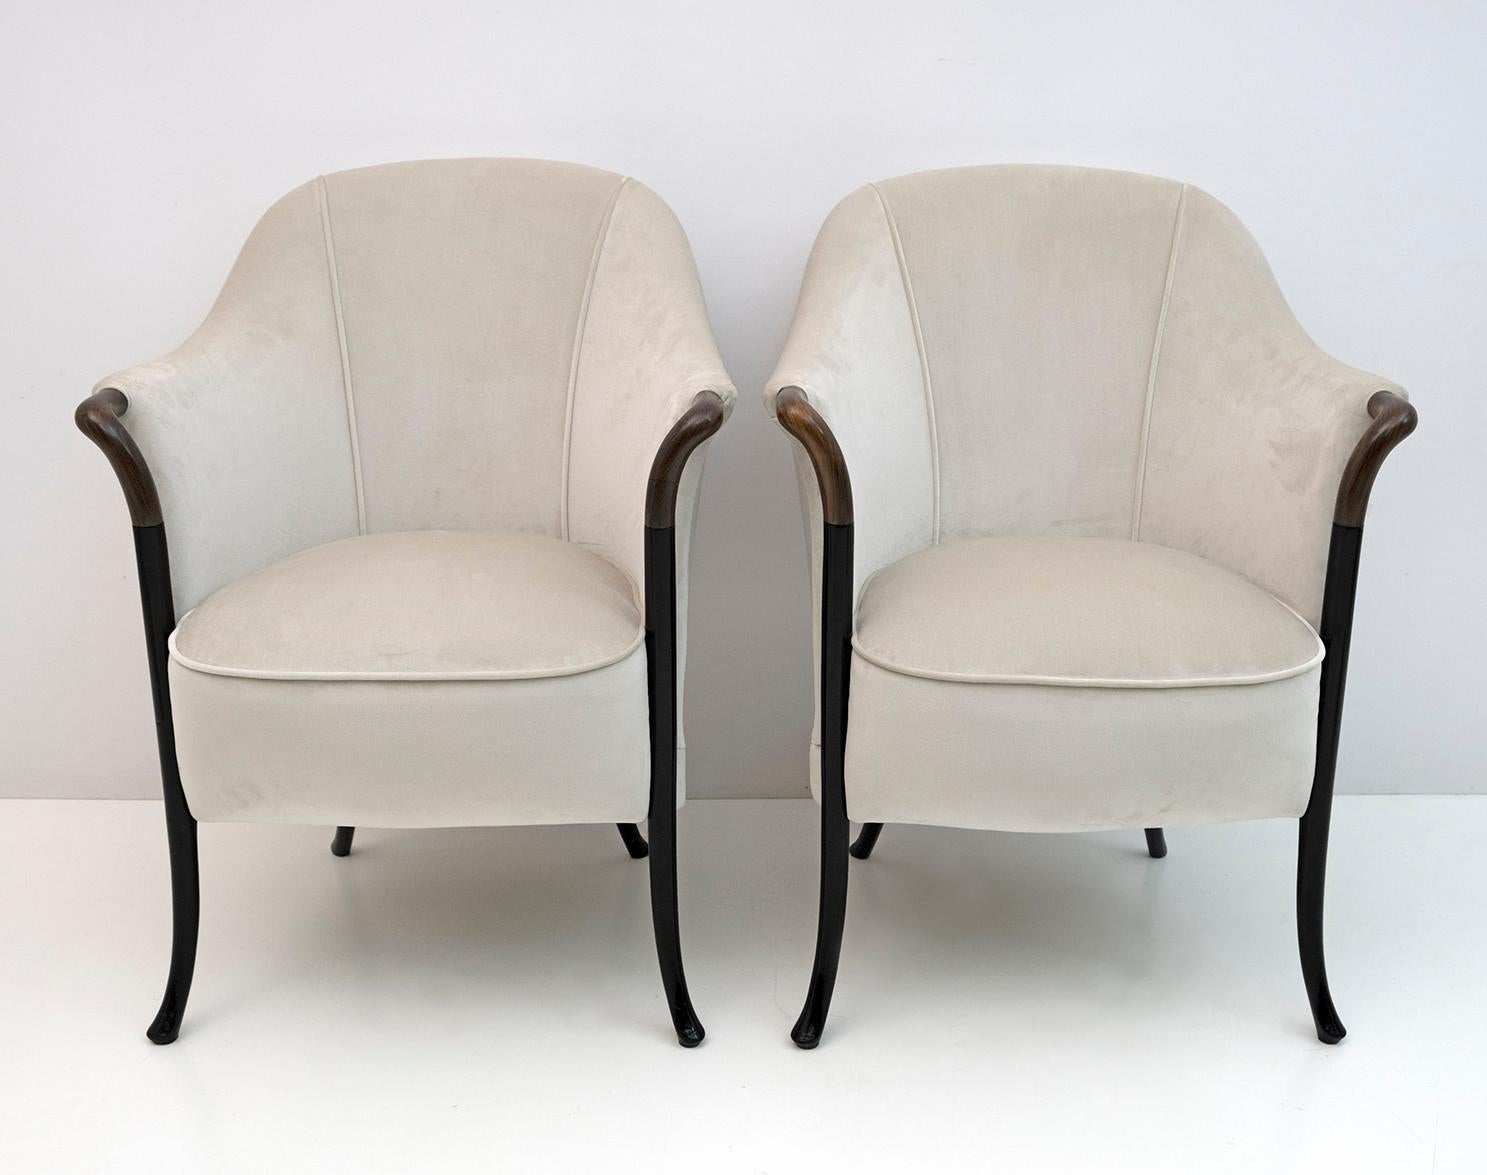 This pair of armchairs in solid ebonized beech and armrests in glossy Pau Ferro, the padding of the seat and back is in polyurethane foam.
They have been completely restored and upholstered in ivory velvet.

Founded by Luigi Giorgetti in Brianza